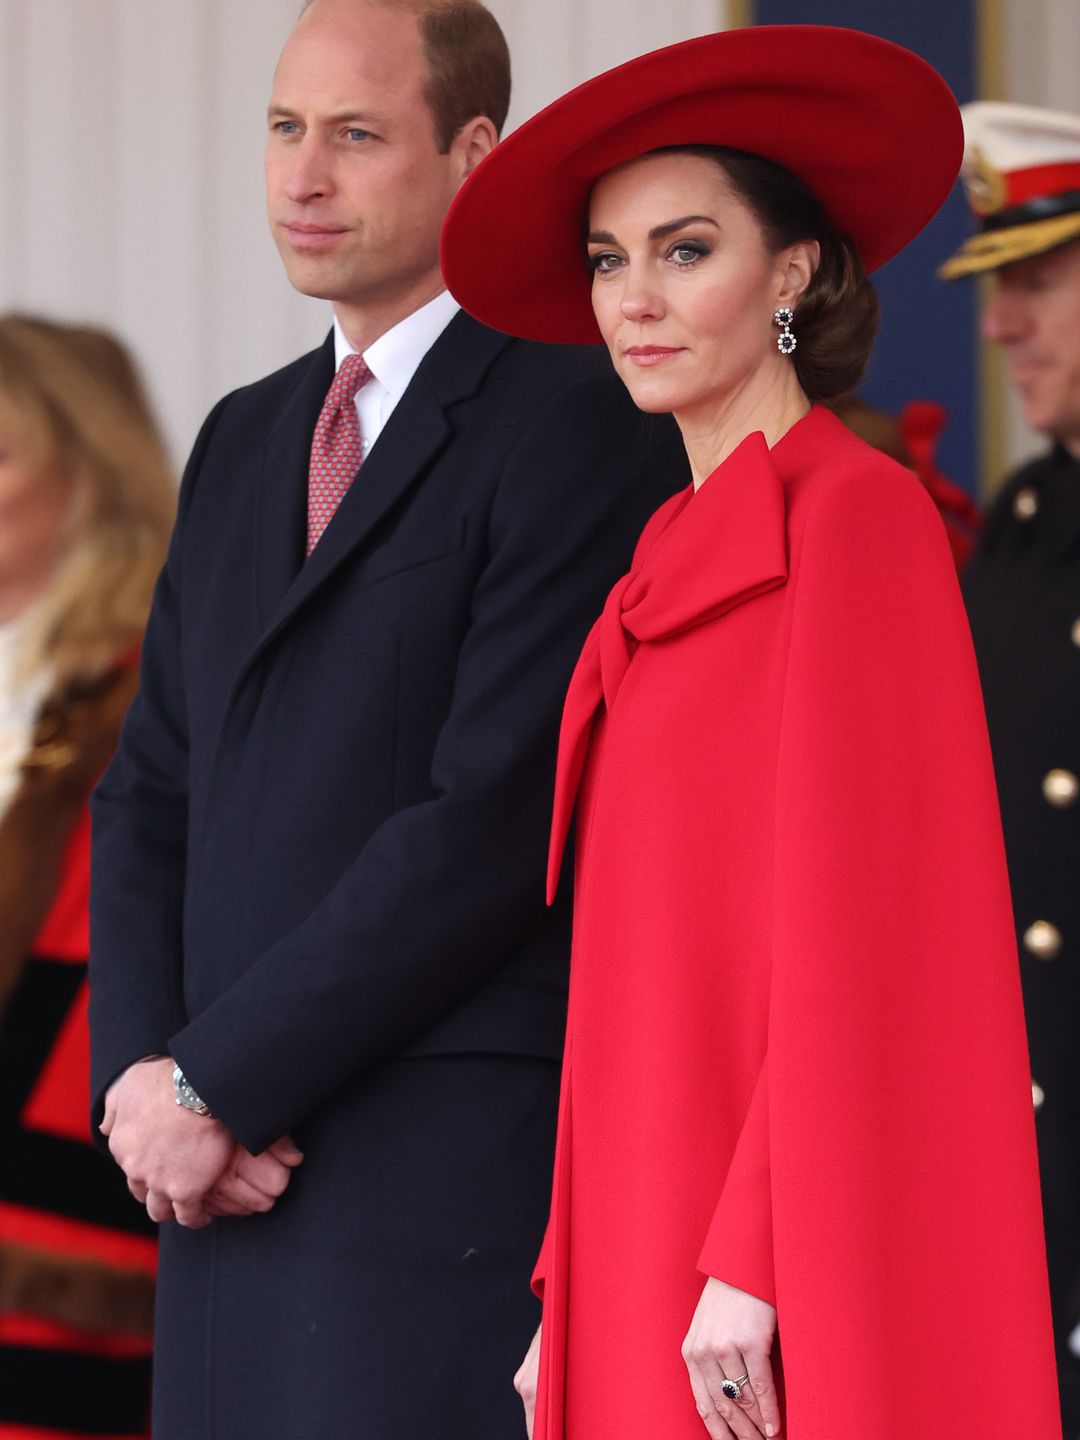 Prince William, Prince of Wales and Catherine, Princess of Wales attend a ceremonial welcome for The President and the First Lady of the Republic of Korea at Horse Guards Parade on November 21, 2023 in London, England. King Charles is hosting Korean President Yoon Suk Yeol and his wife Kim Keon Hee on a state visit from November 21-23. It is the second incoming state visit hosted by the King during his reign. (Photo by Chris Jackson - WPA Pool/Getty Images)